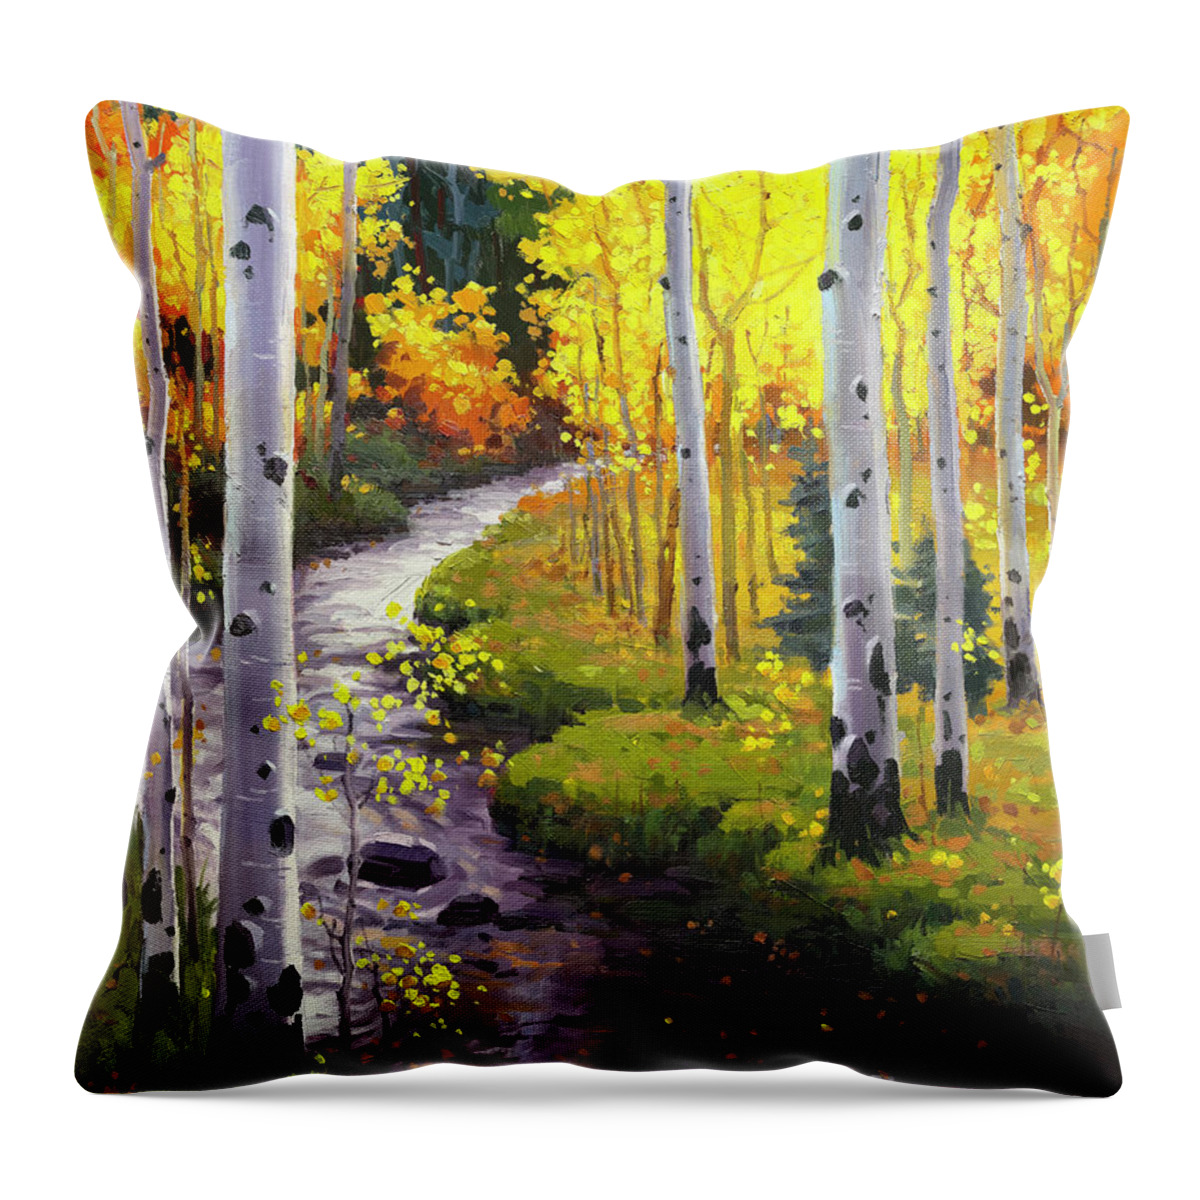 Large Mural Painting Aspen Throw Pillow featuring the painting Aspen Twilight by Gary Kim